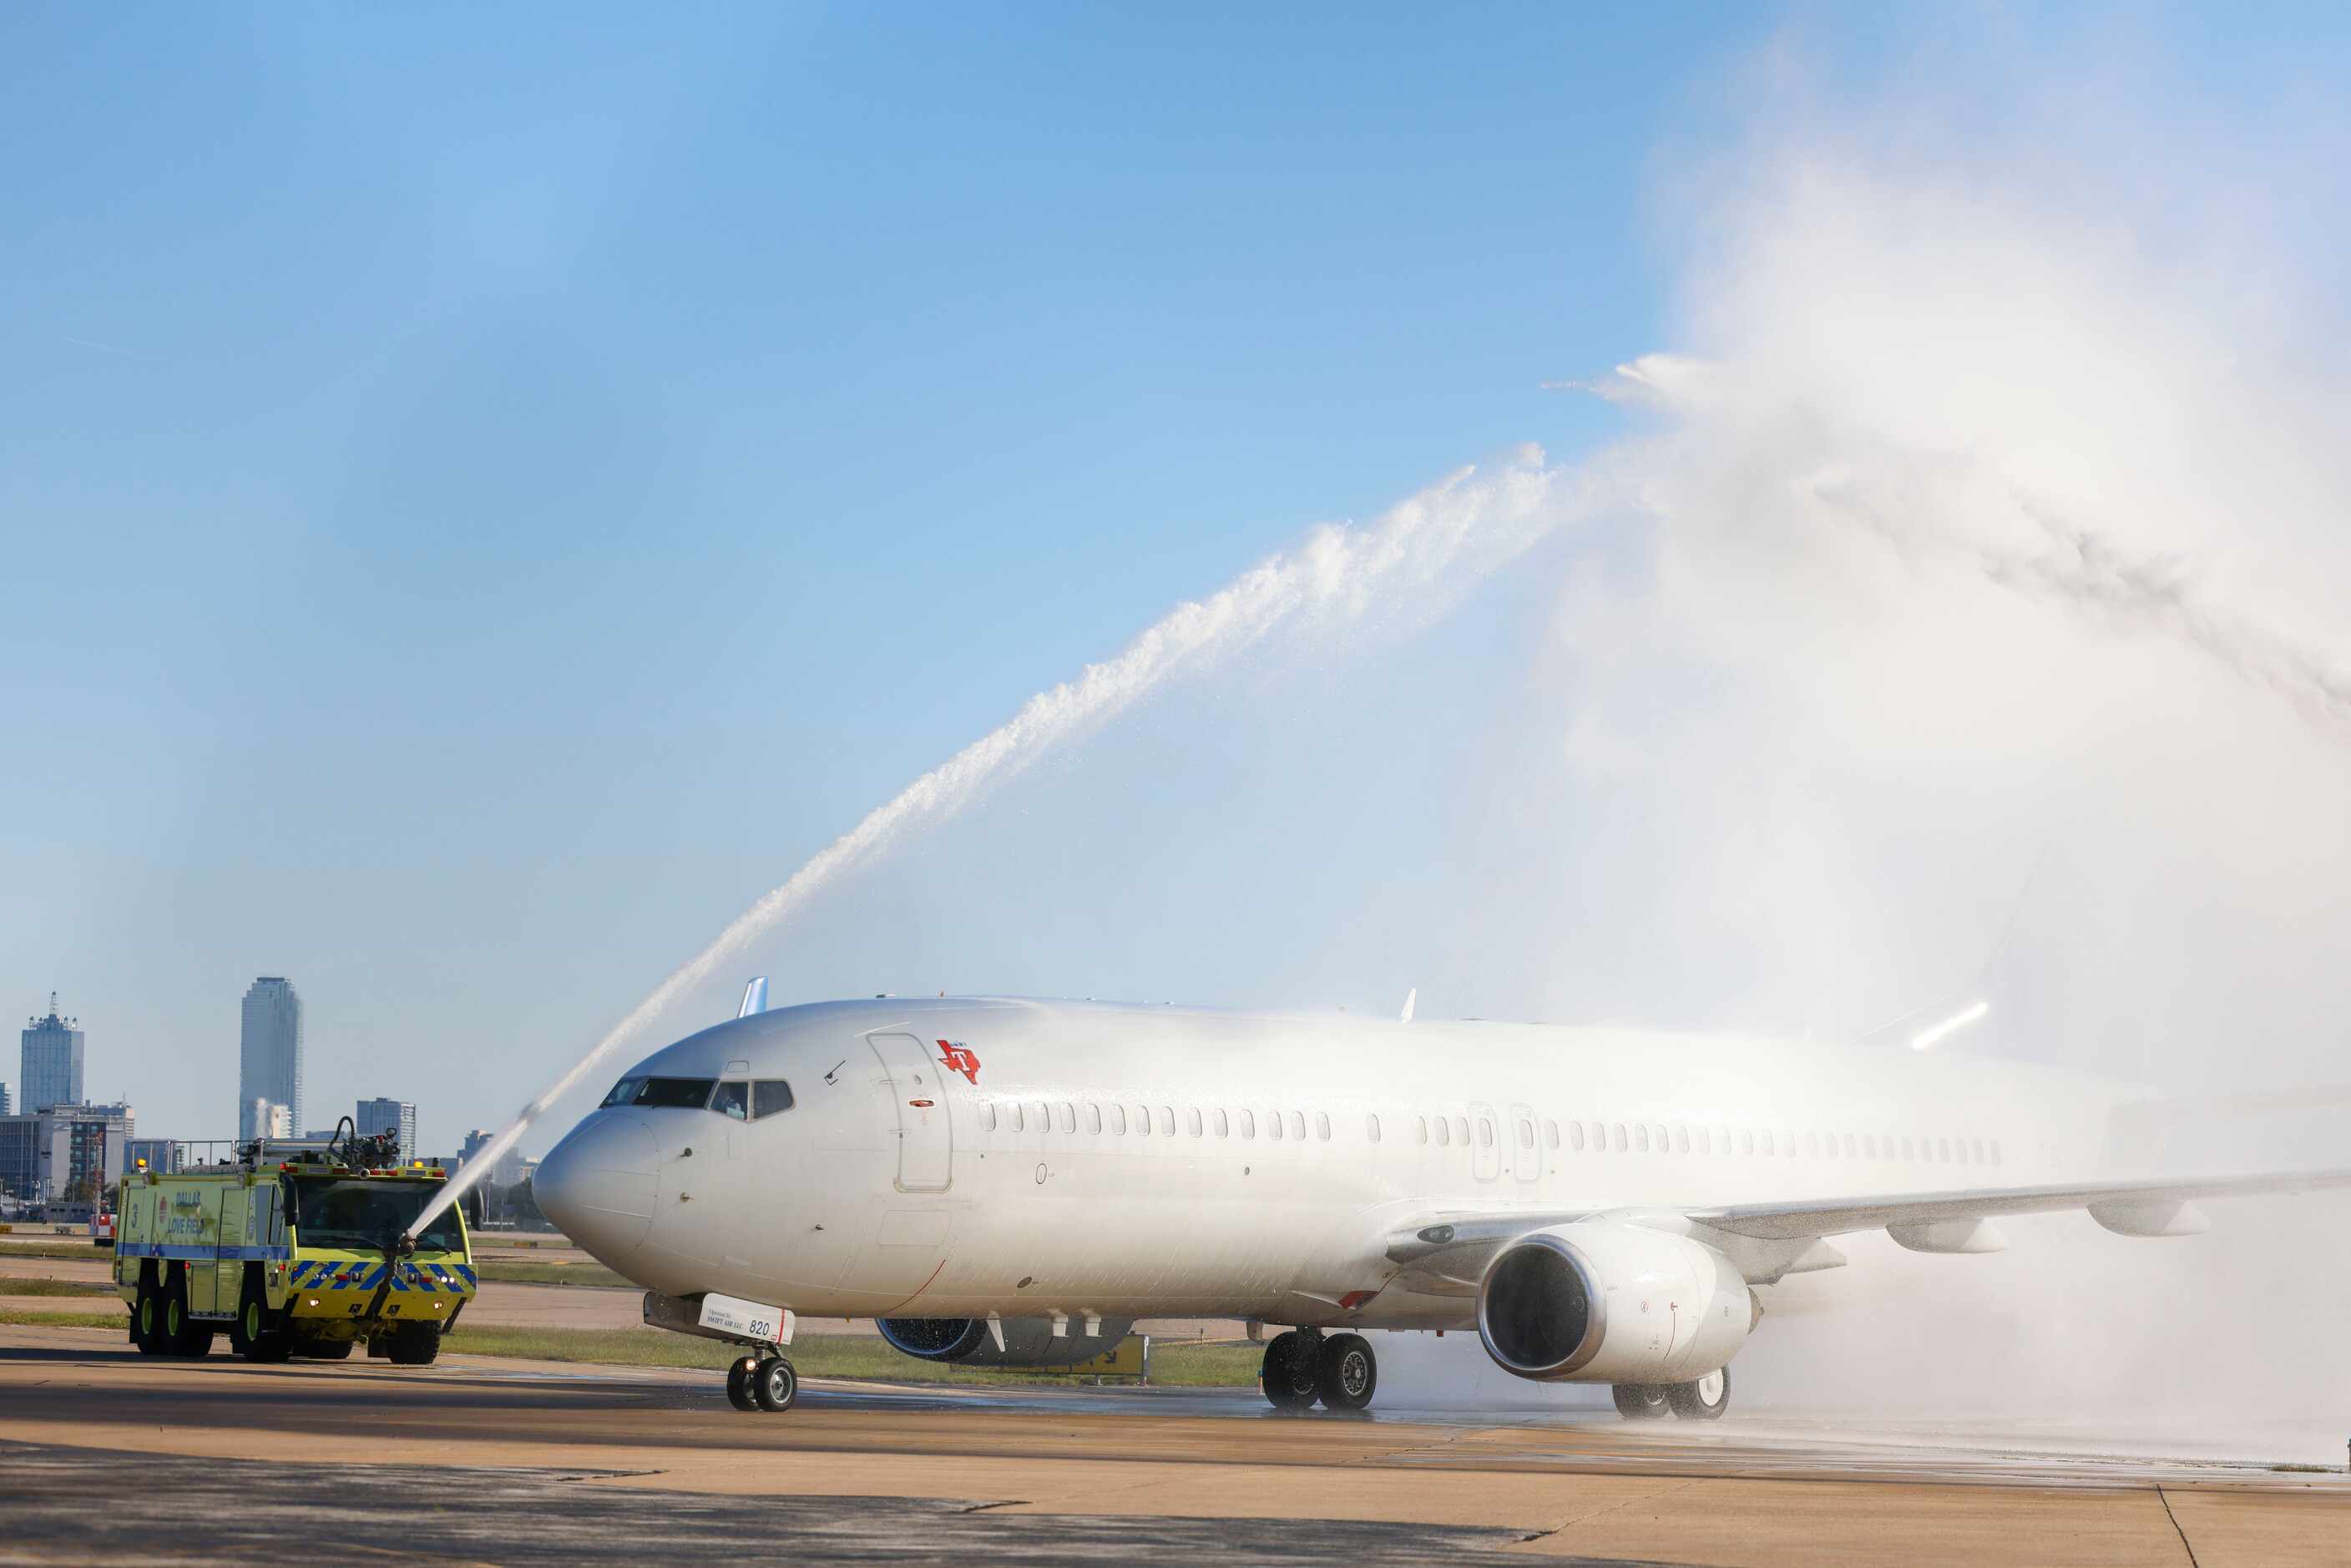 Texas Rangers players arrive at Dallas Love Field as rescue trucks doused water over the...